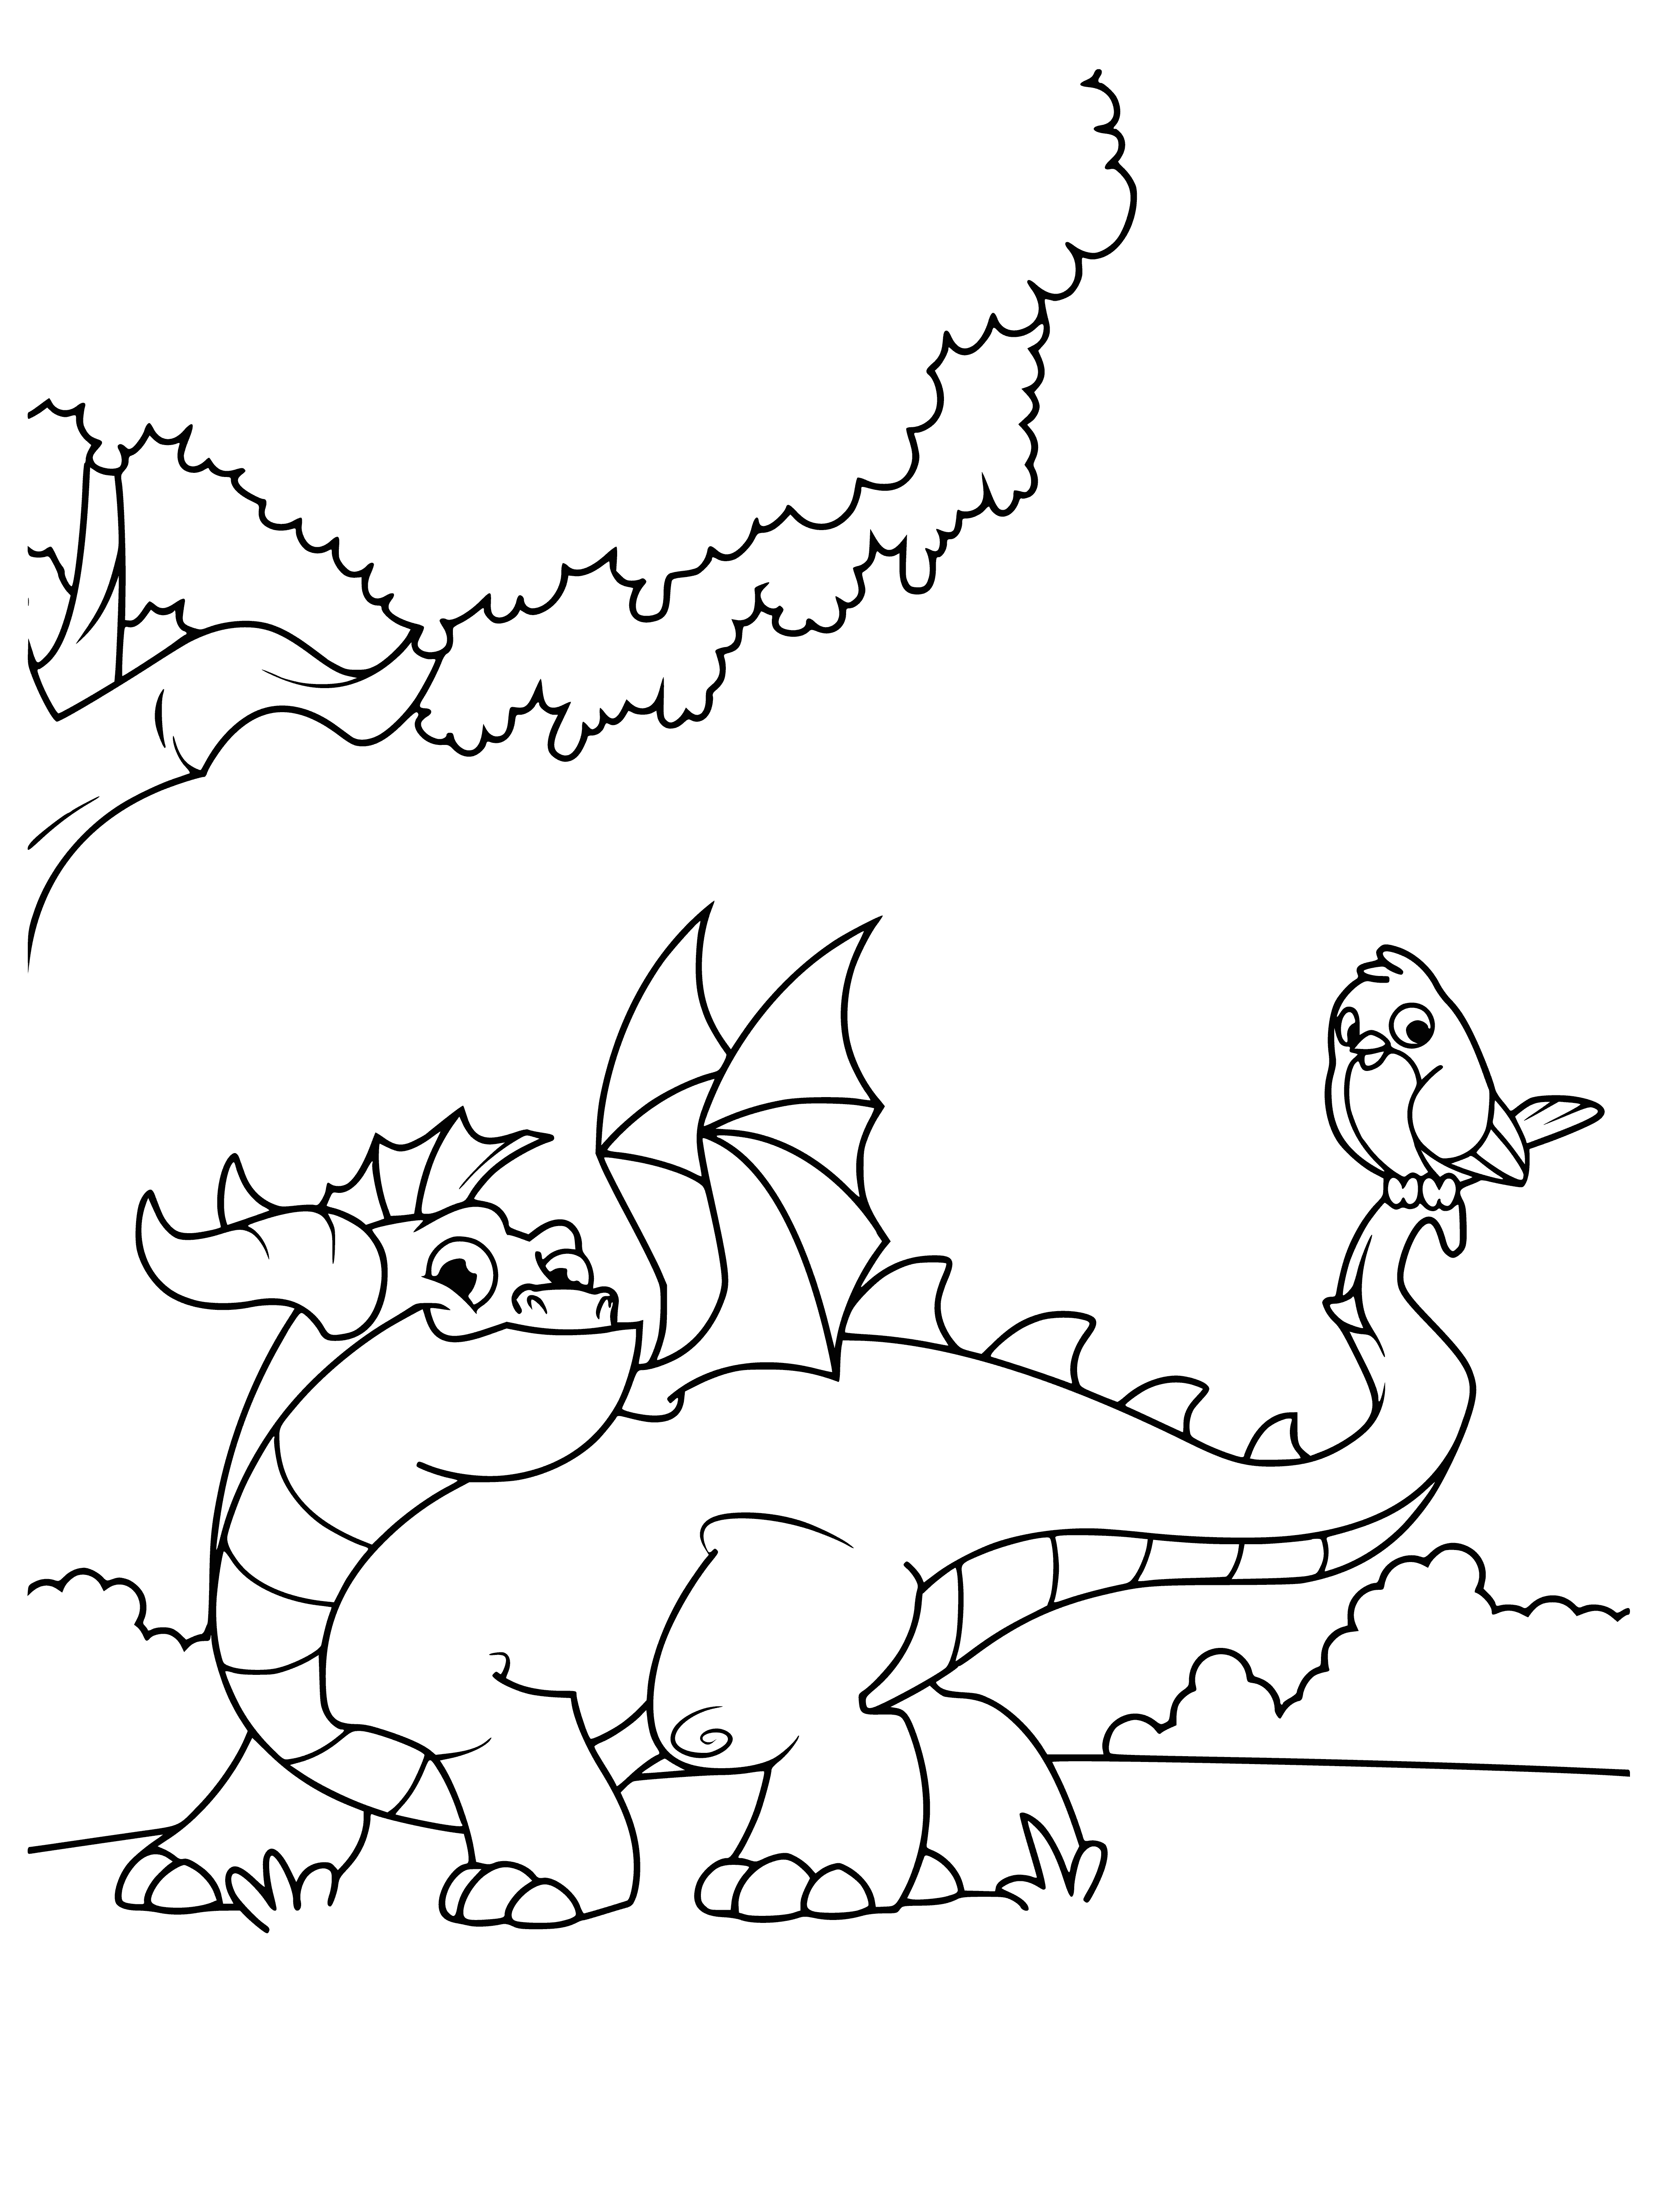 coloring page: A dragon is walking through a green field with red wings and a long tail, wearing a gold necklace with a green gem in its center.